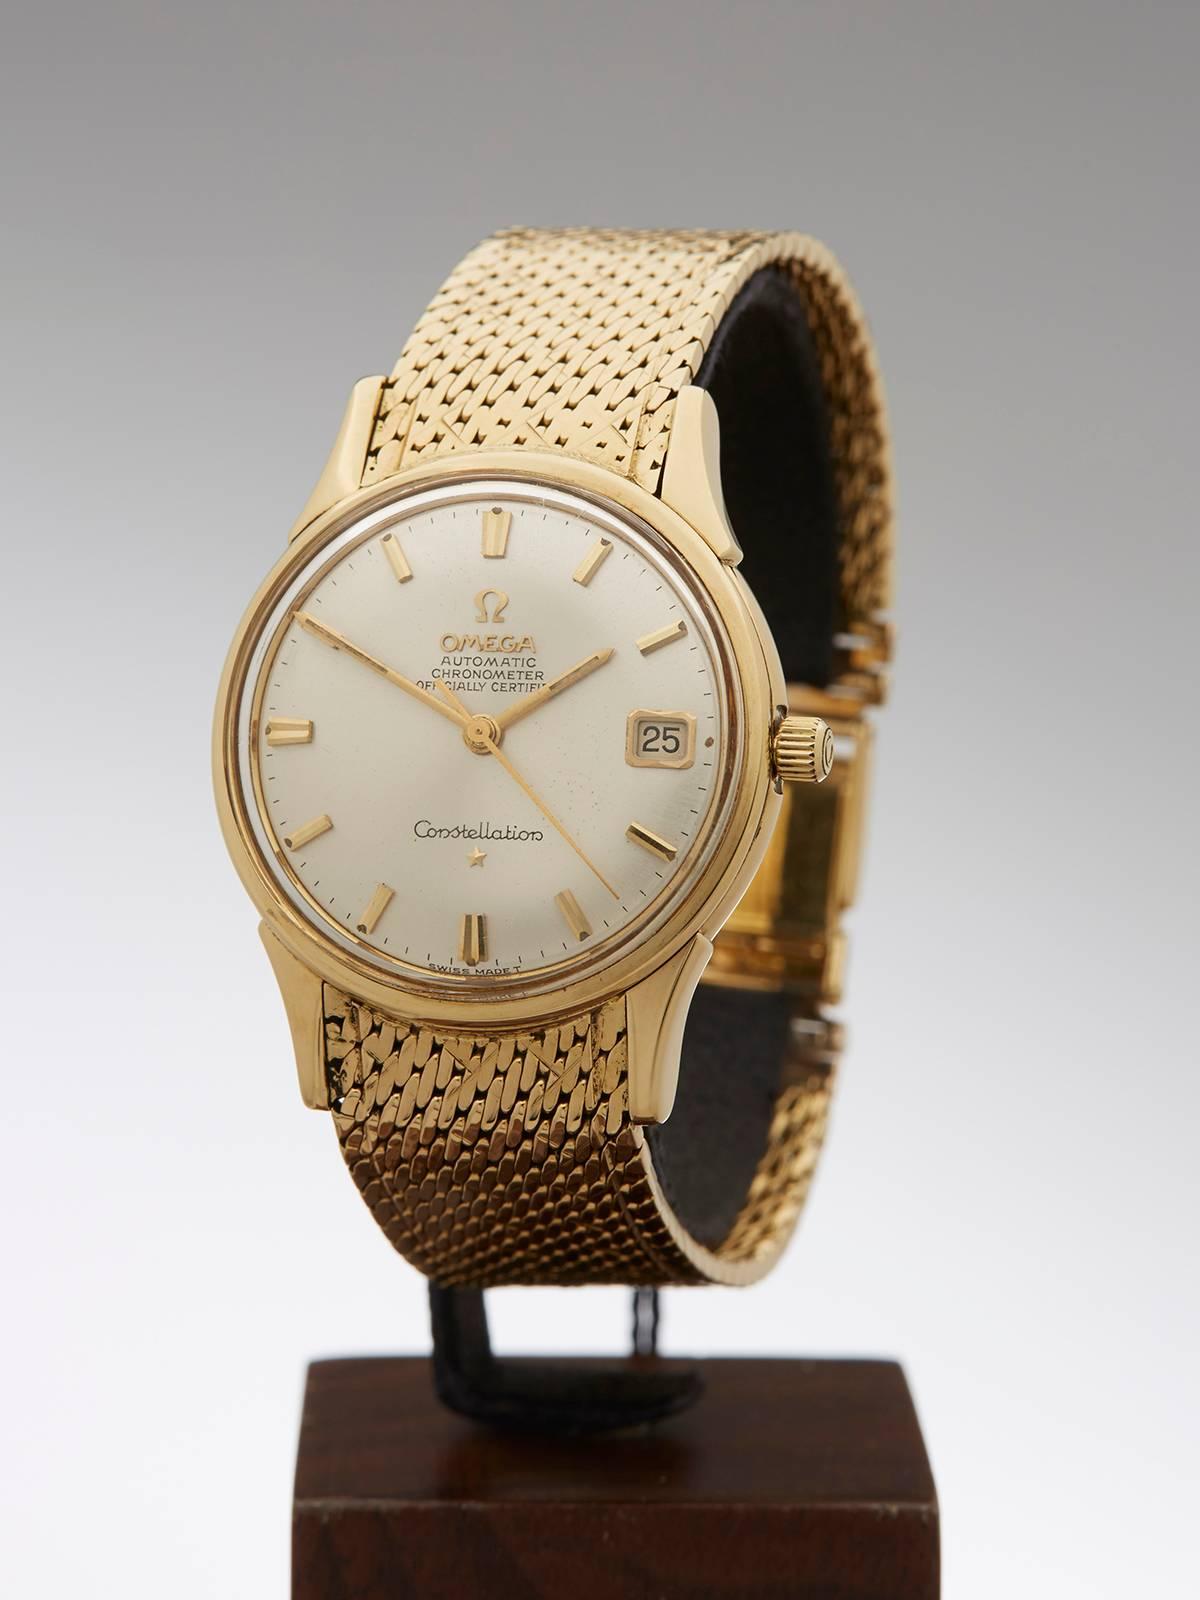 
Ref 	COM348
Condition 	8.5 - Good condition
Gender 	Unisex
Age 	1980's
Case Size 	34mm
Box & Papers 	Xupes Presentation Pouch
Movement 	Automatic
Case 	18k Yellow Gold
Dial 	White with Roman numerals
Bracelet 	18k Yellow Gold
Strap Length